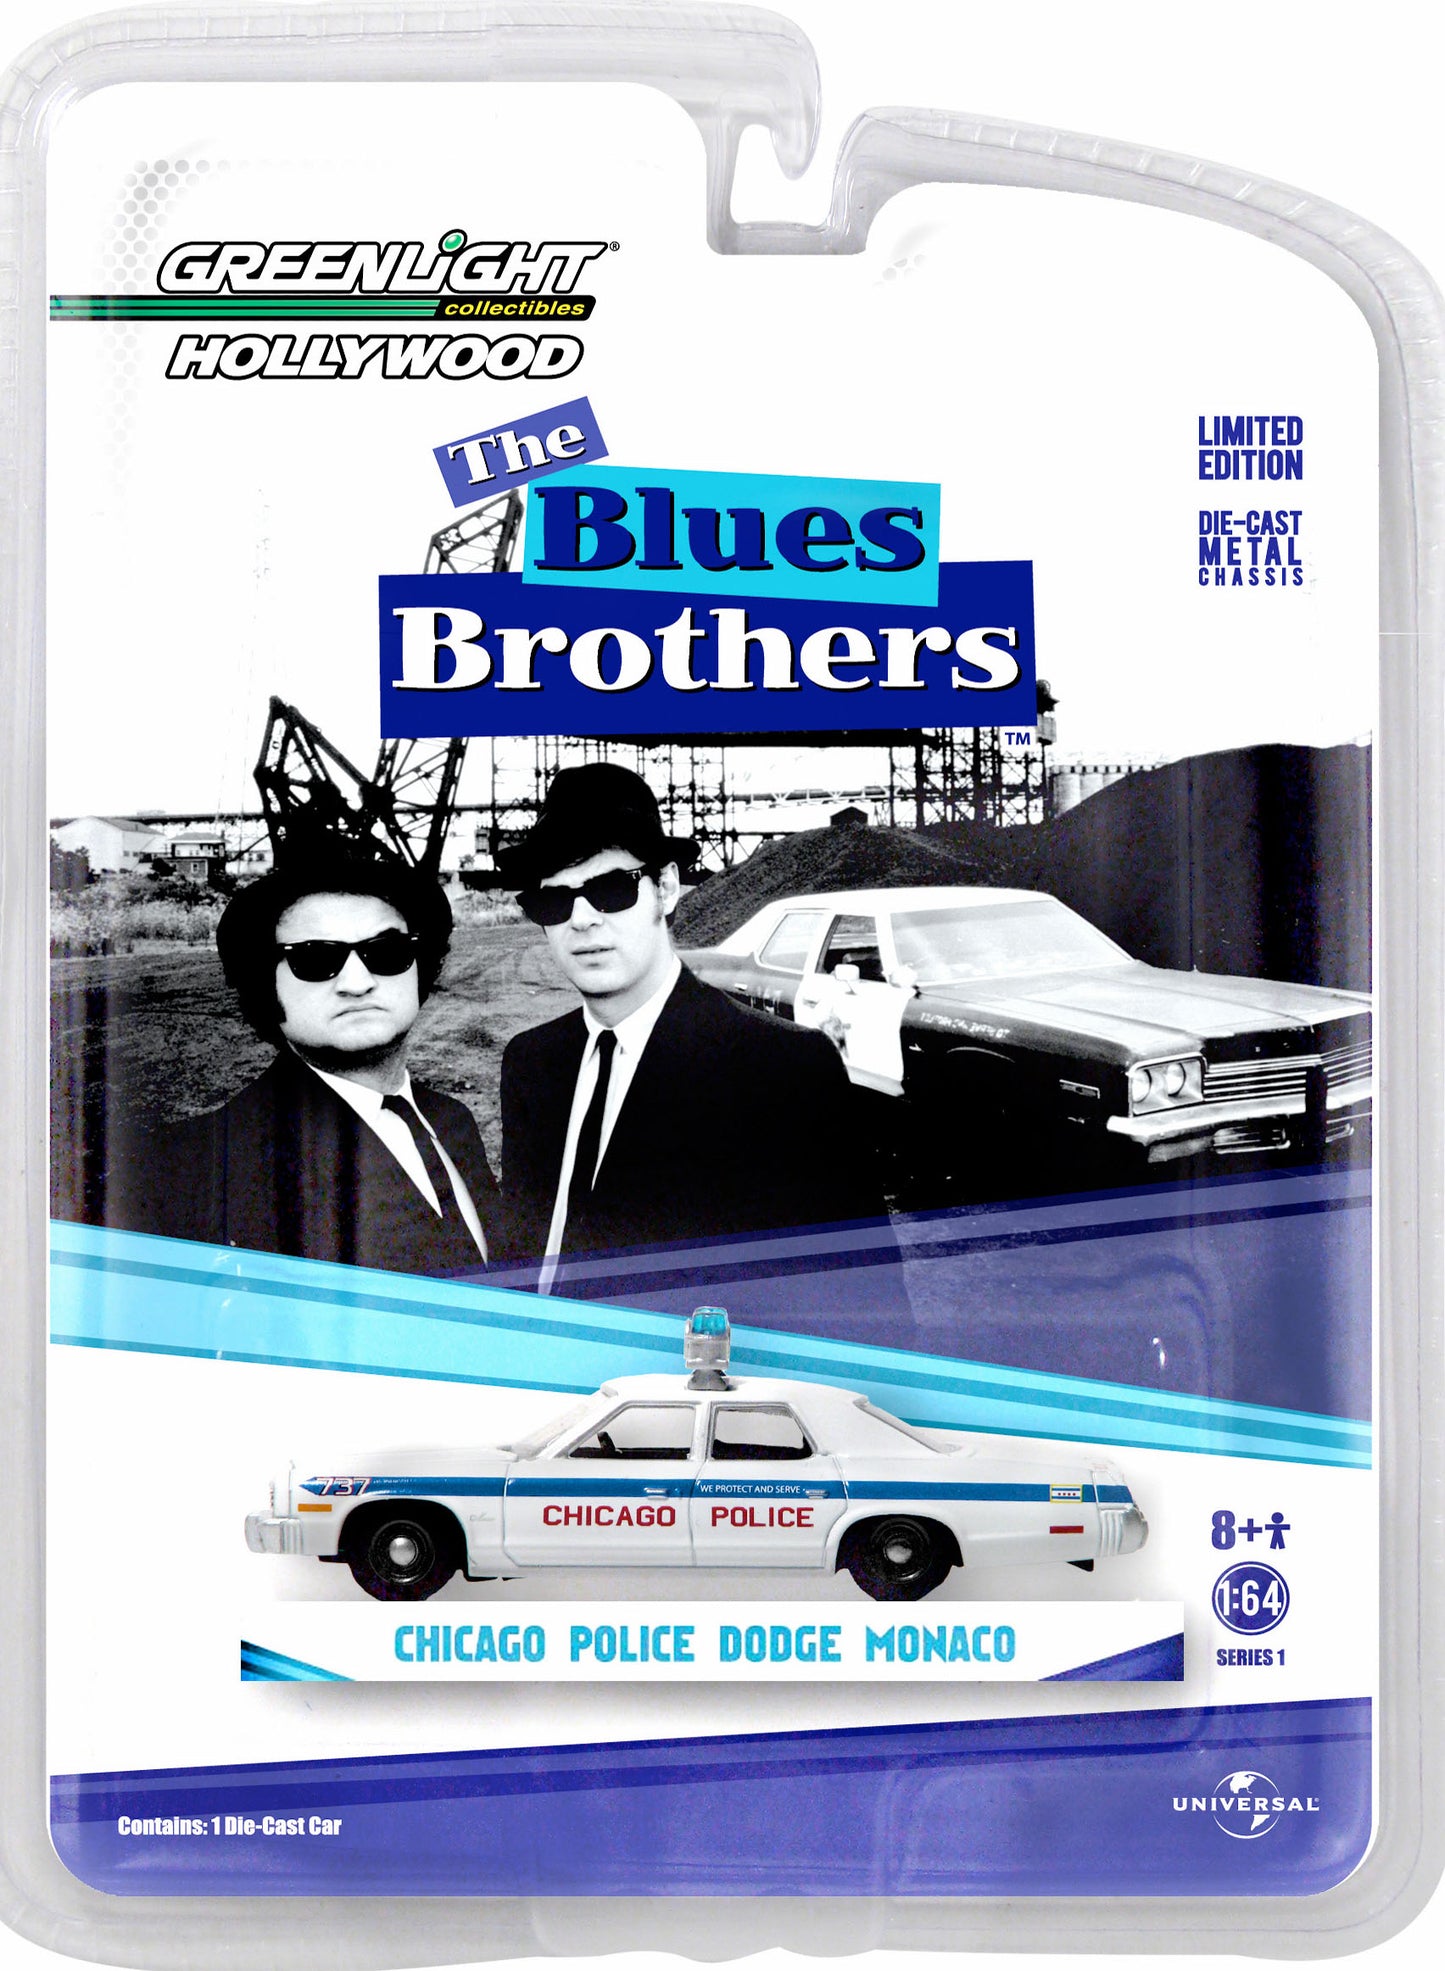 1974 Dodge Monaco "Chicago Police" (White) "The Blues Brothers"